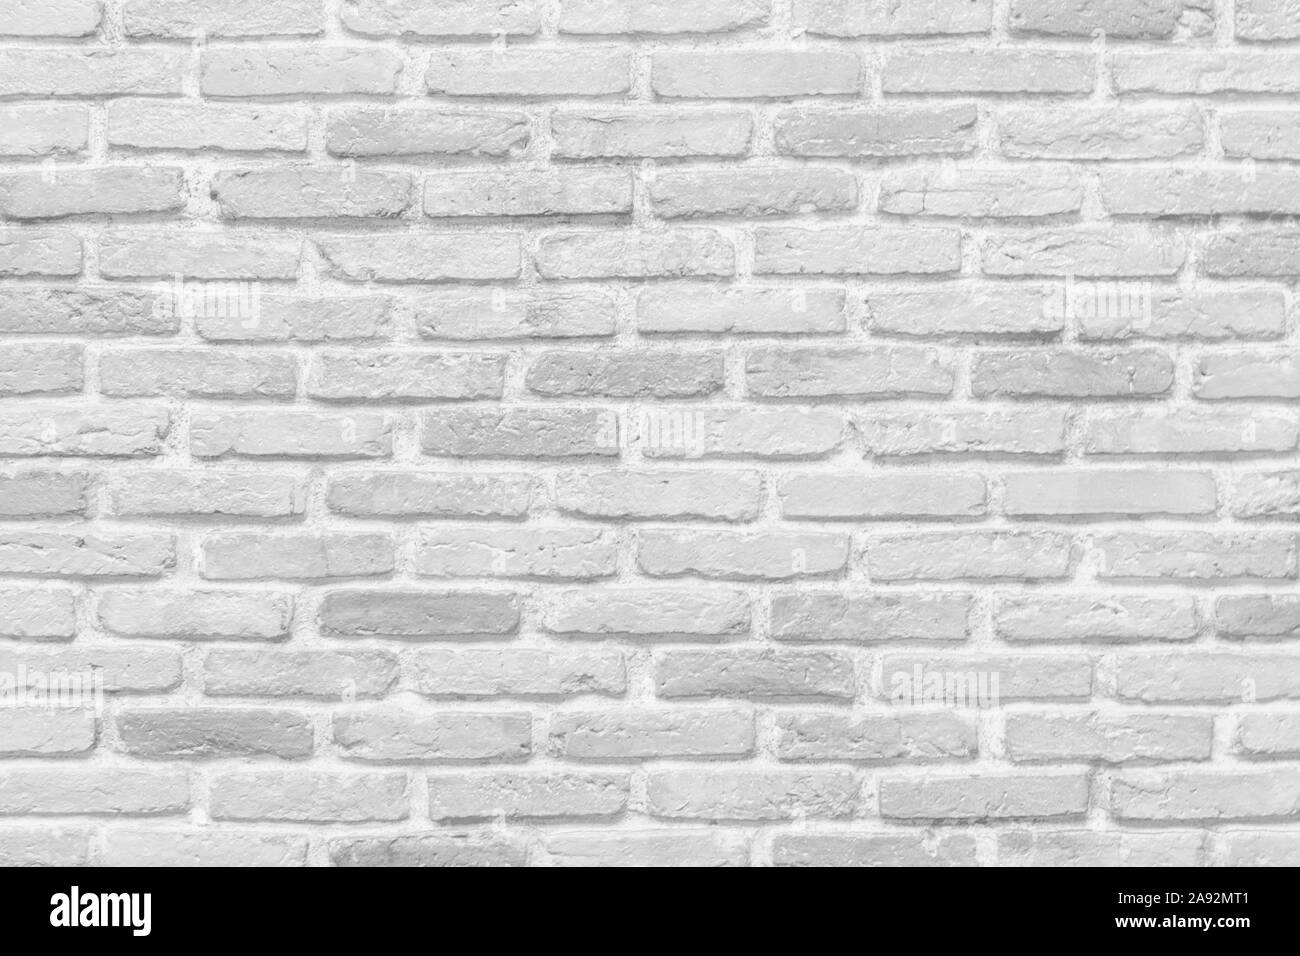 Brick Wall Black And White Stock Photos Images Alamy